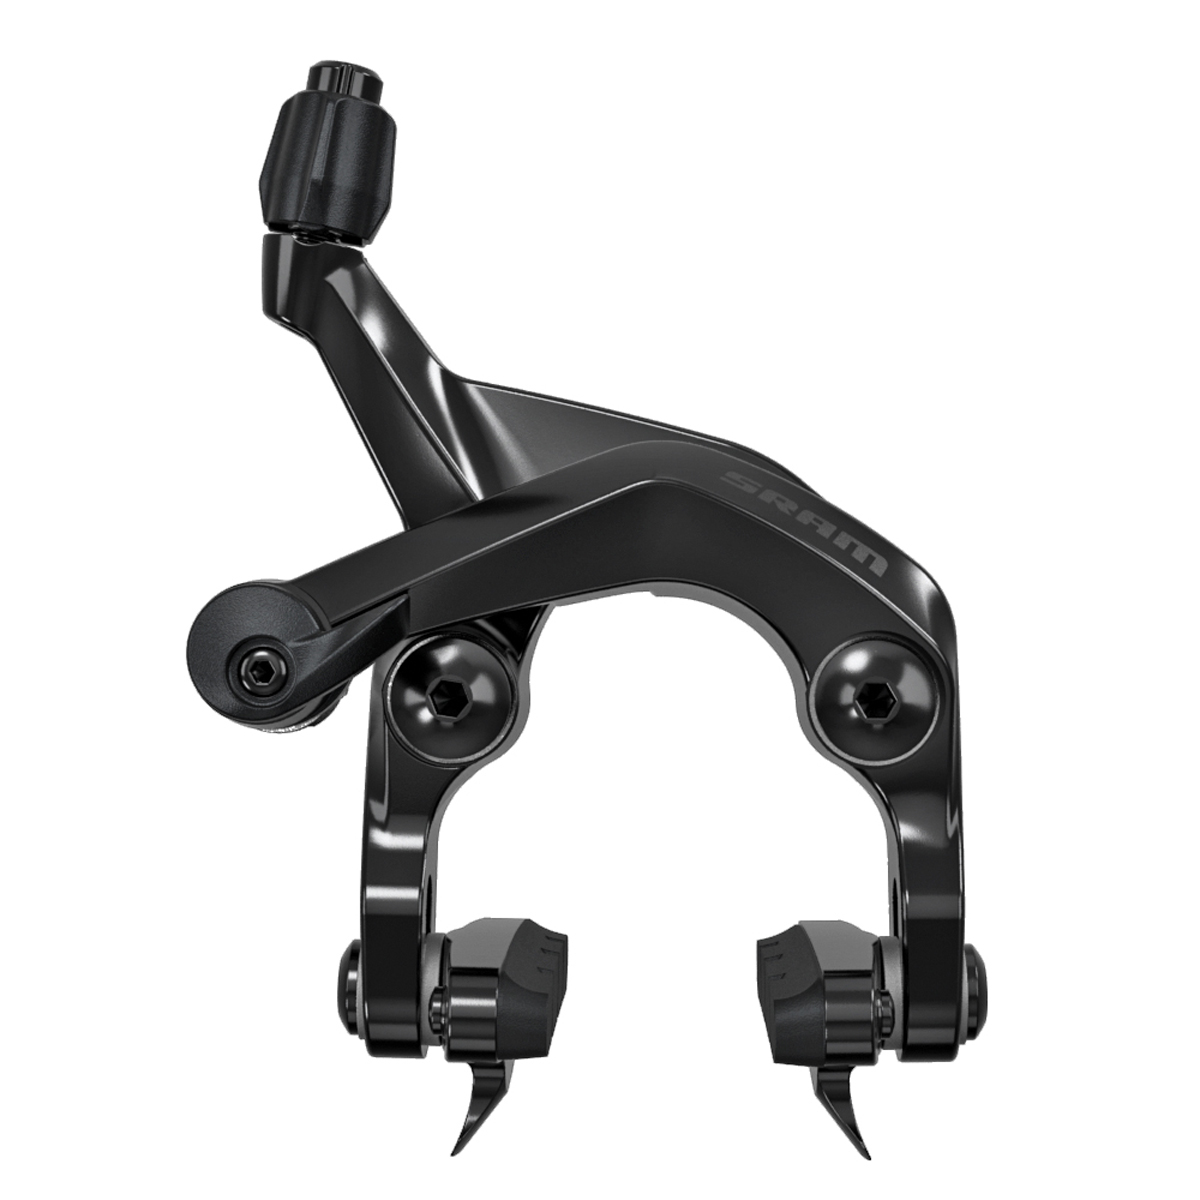 SRAM slides into road DMs with new S-900 Direct Mount Brake